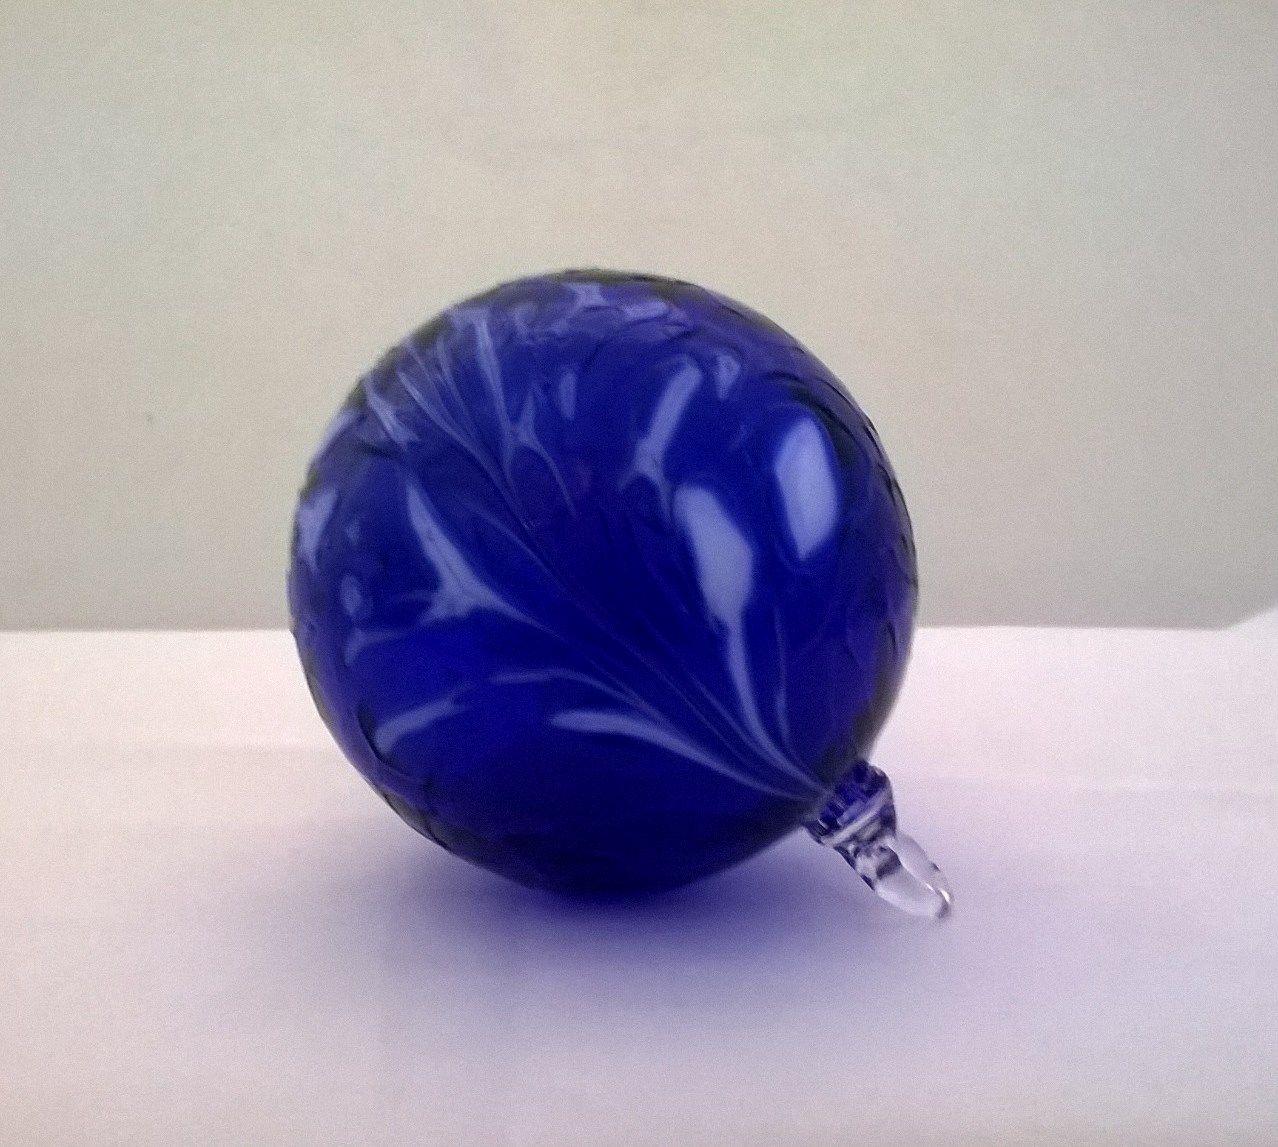 Blue Purple Sphere Logo - Cobalt Blue with White Feather Ornament Gardens. Jewell